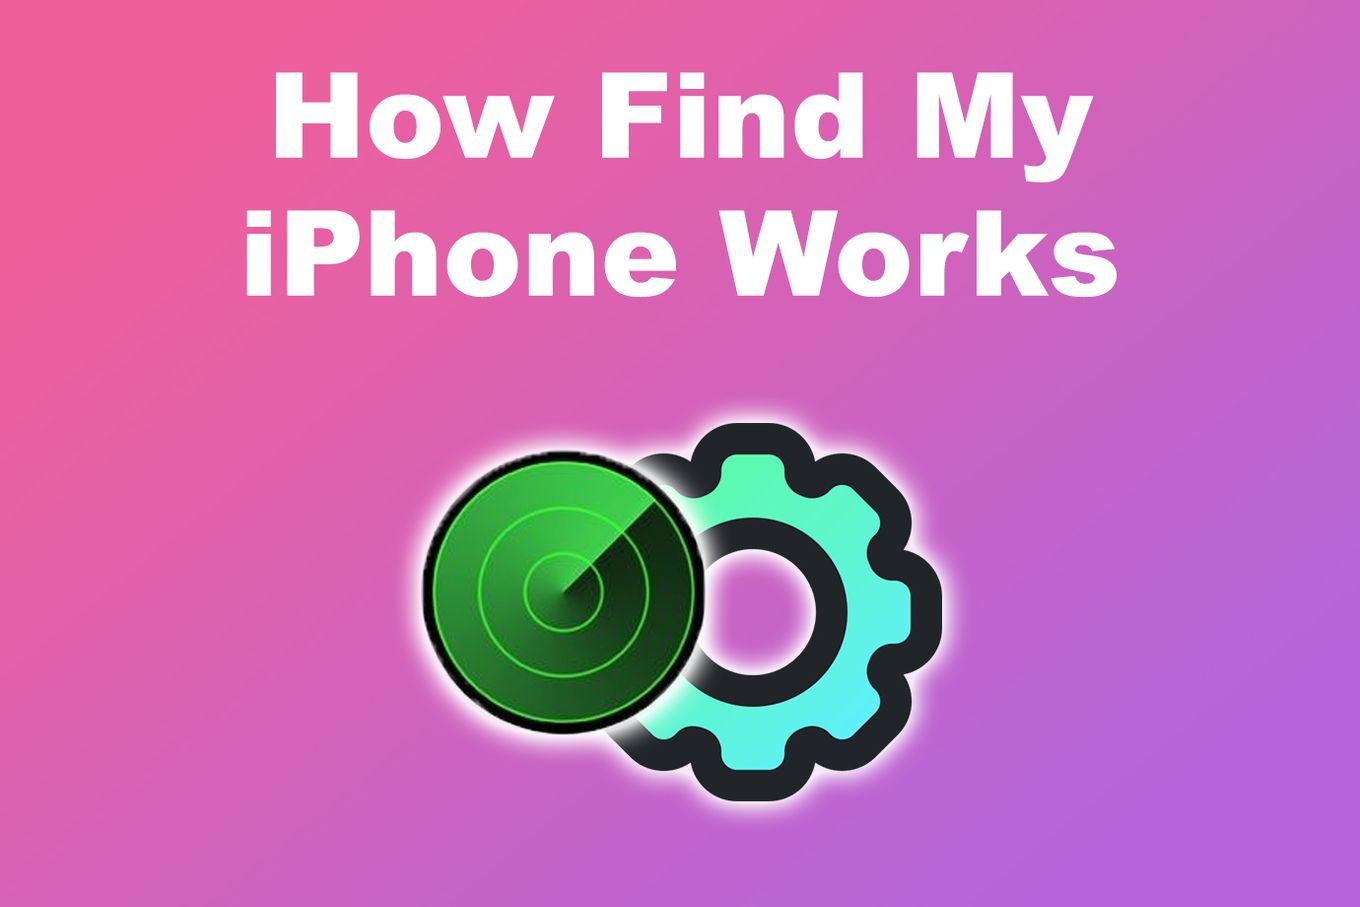 How to Find My iPhone Works